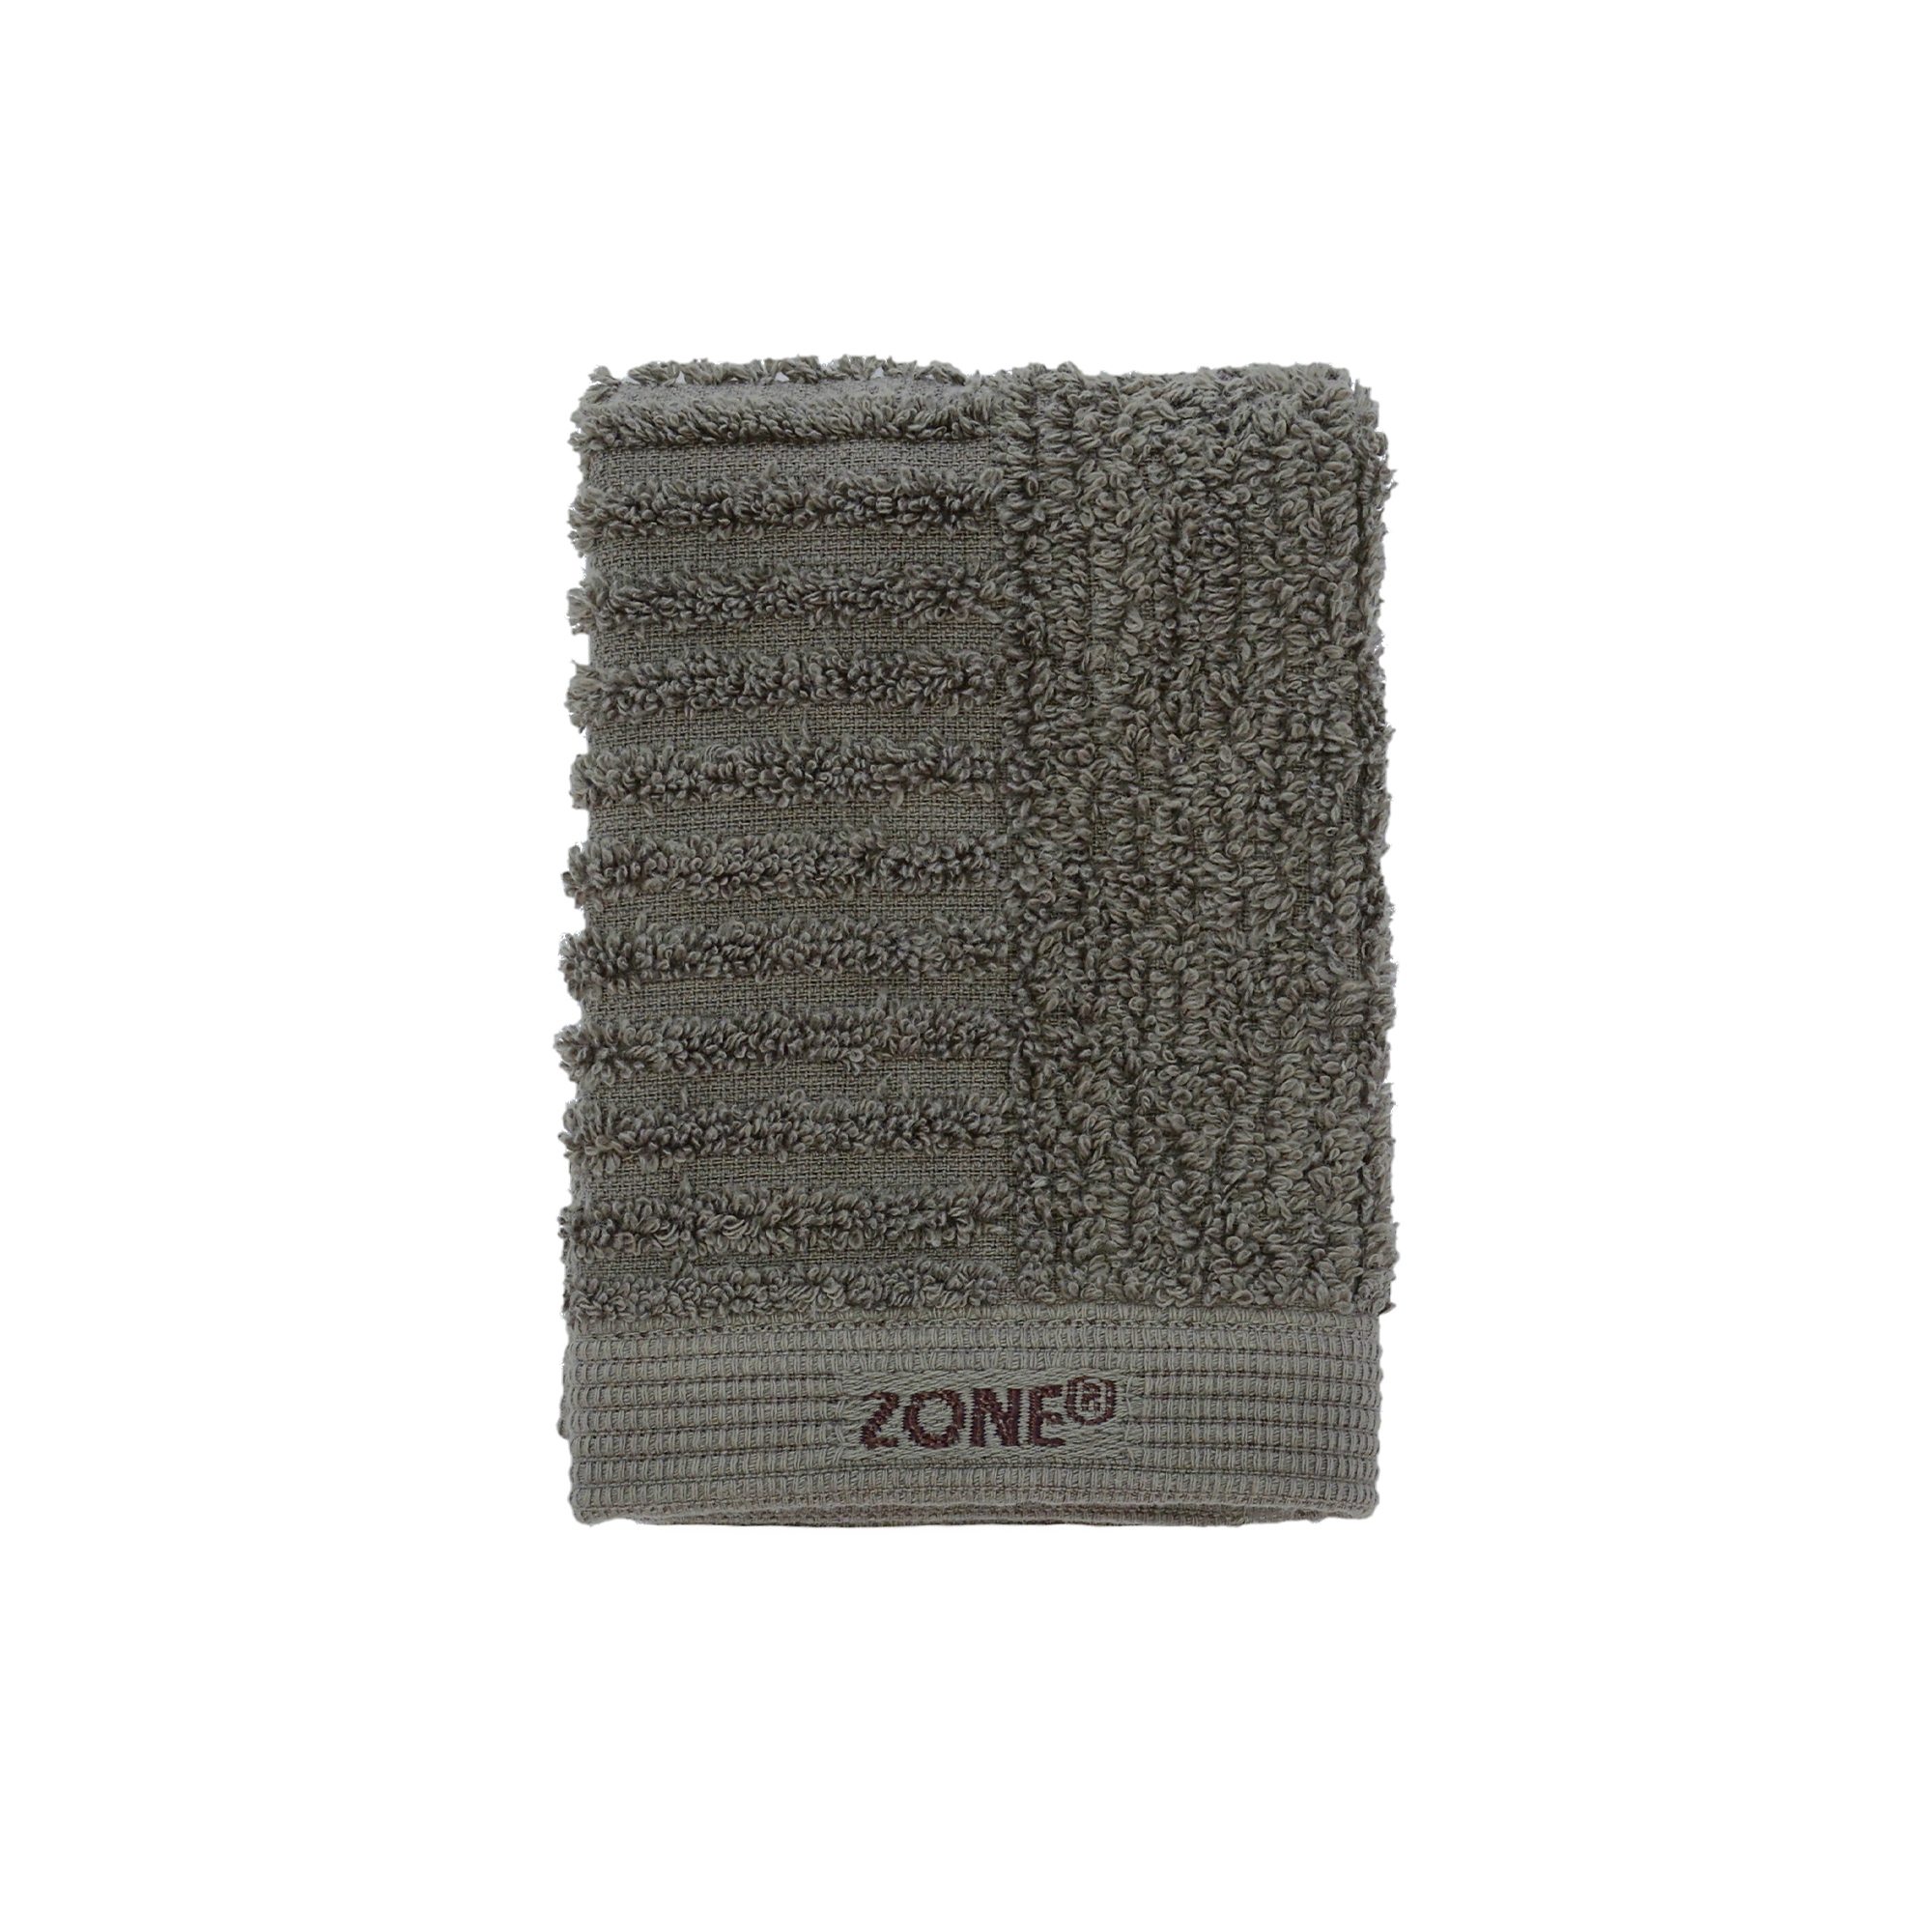 Zone - Classic Flannel - 30 x 30 cm - Olive Green